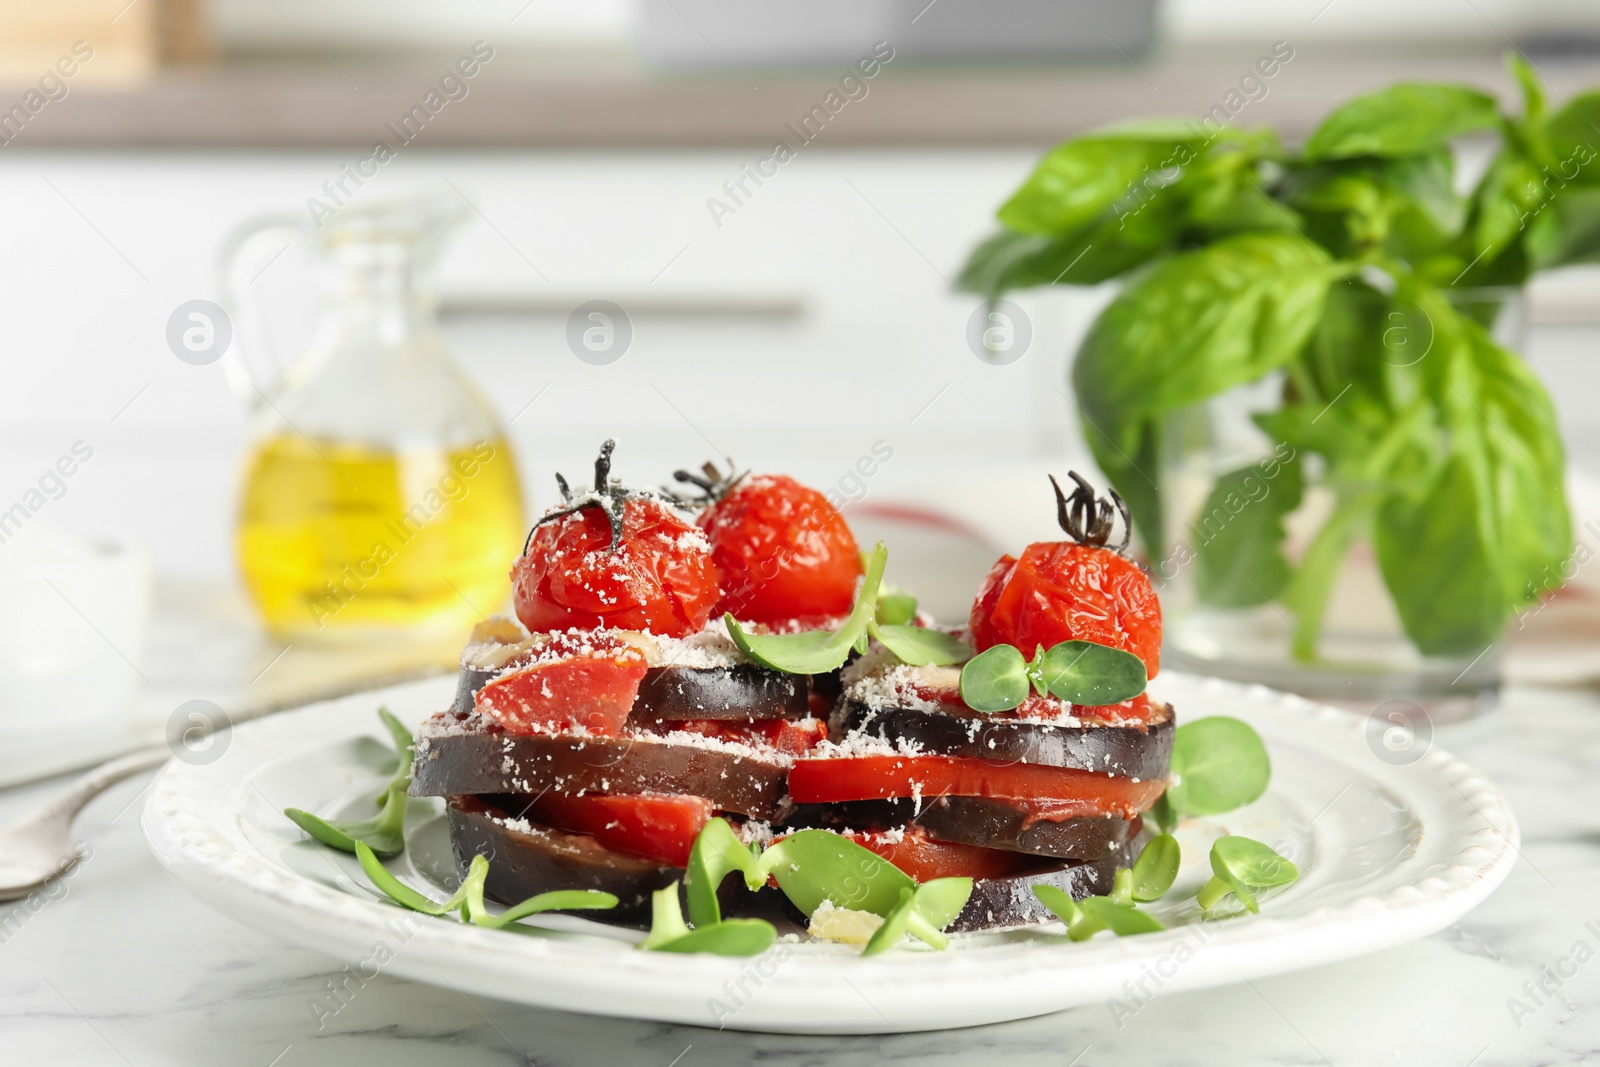 Photo of Baked eggplant with tomatoes, cheese and basil on kitchen table